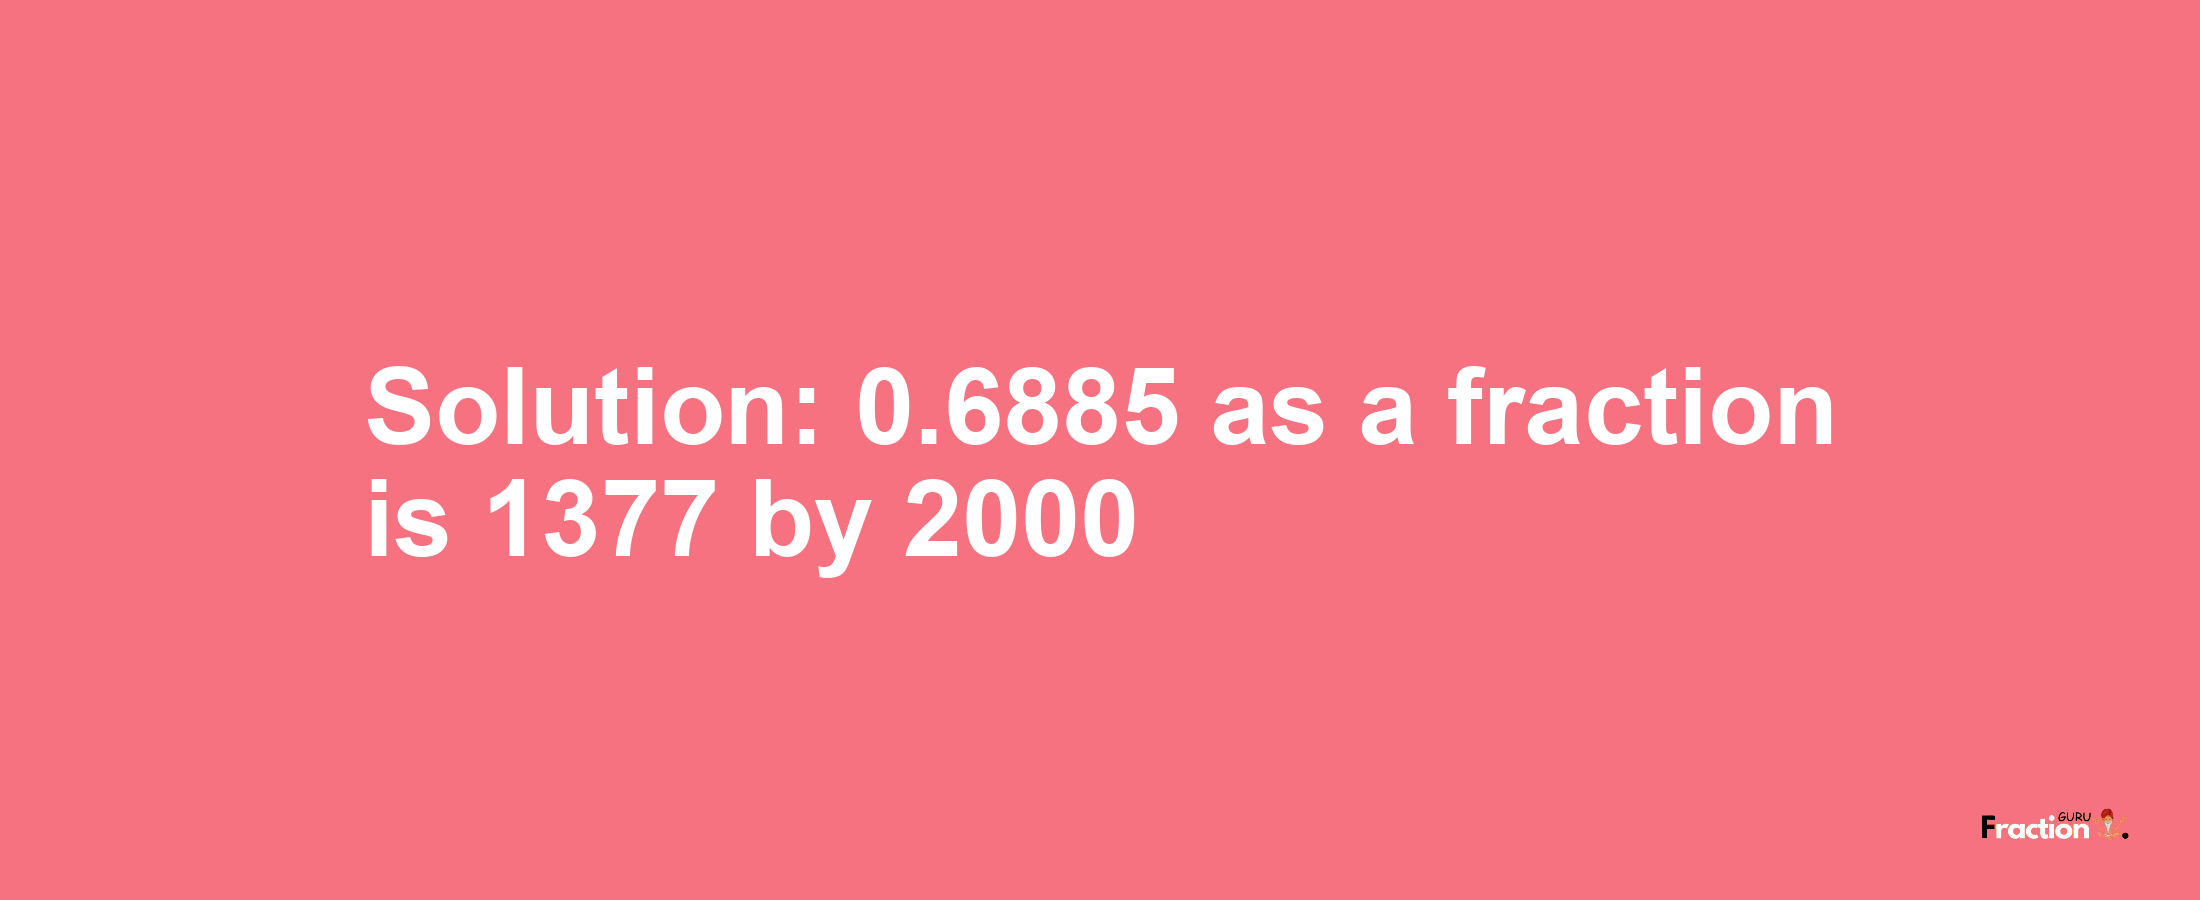 Solution:0.6885 as a fraction is 1377/2000